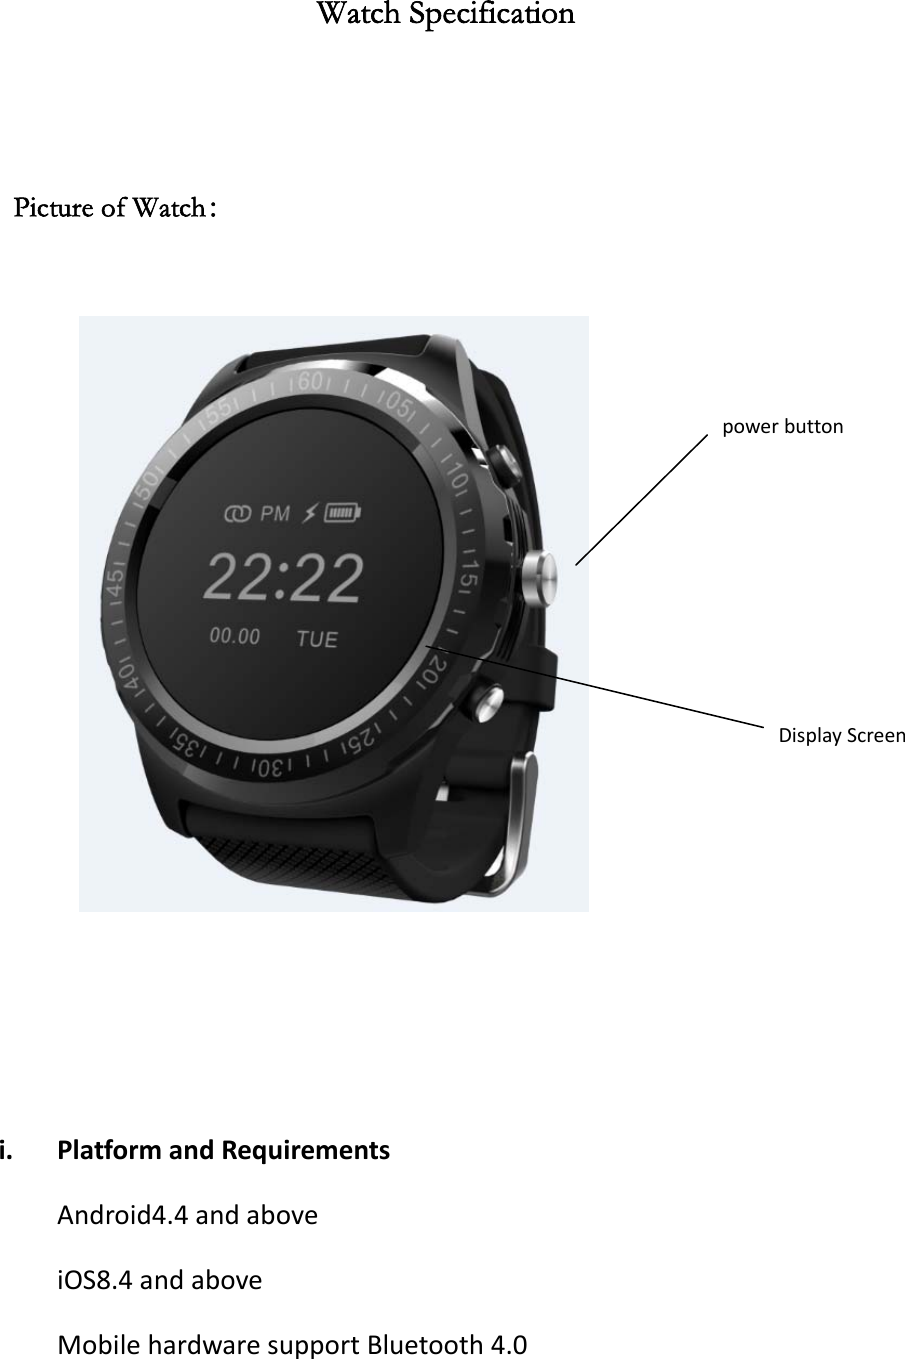 Watch Specification   Picture of Watch：     i. PlatformandRequirementsAndroid4.4andaboveiOS8.4andaboveMobilehardwaresupportBluetooth4.0powerbuttonDisplayScreen